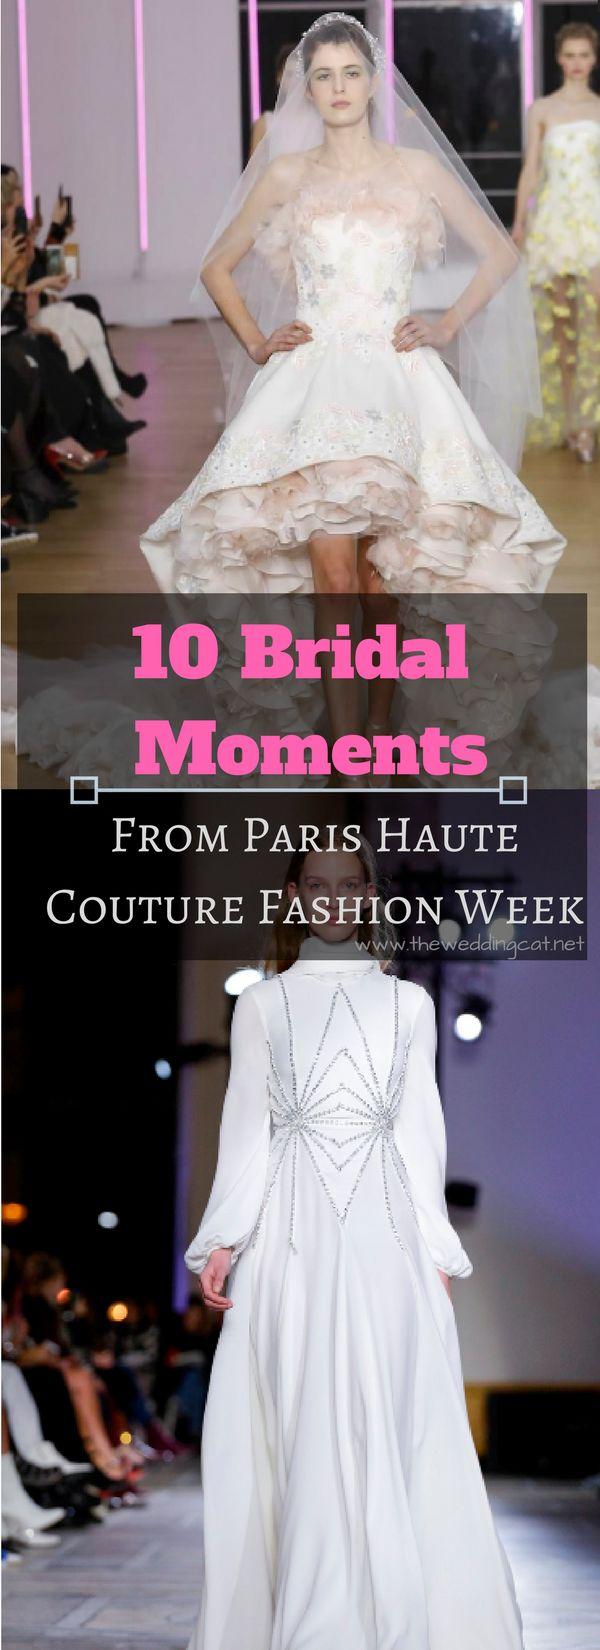 Hochzeit - 10 Bridal Moments From Haute Couture Fashion Week